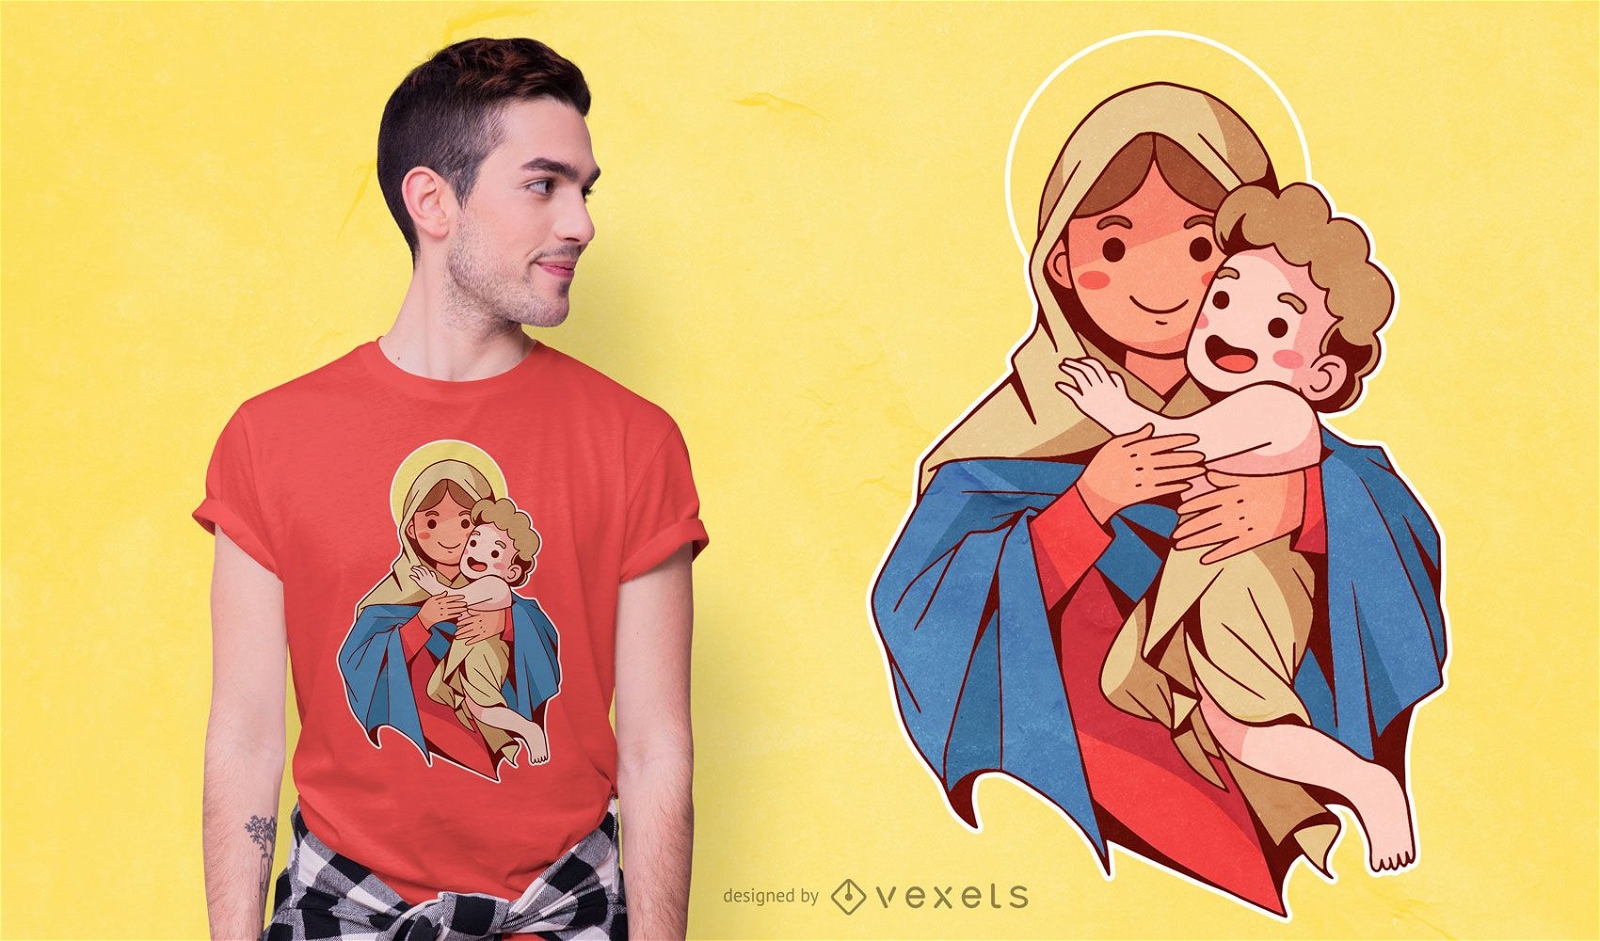 Nettes jungfr?uliches Mary-T-Shirt Design